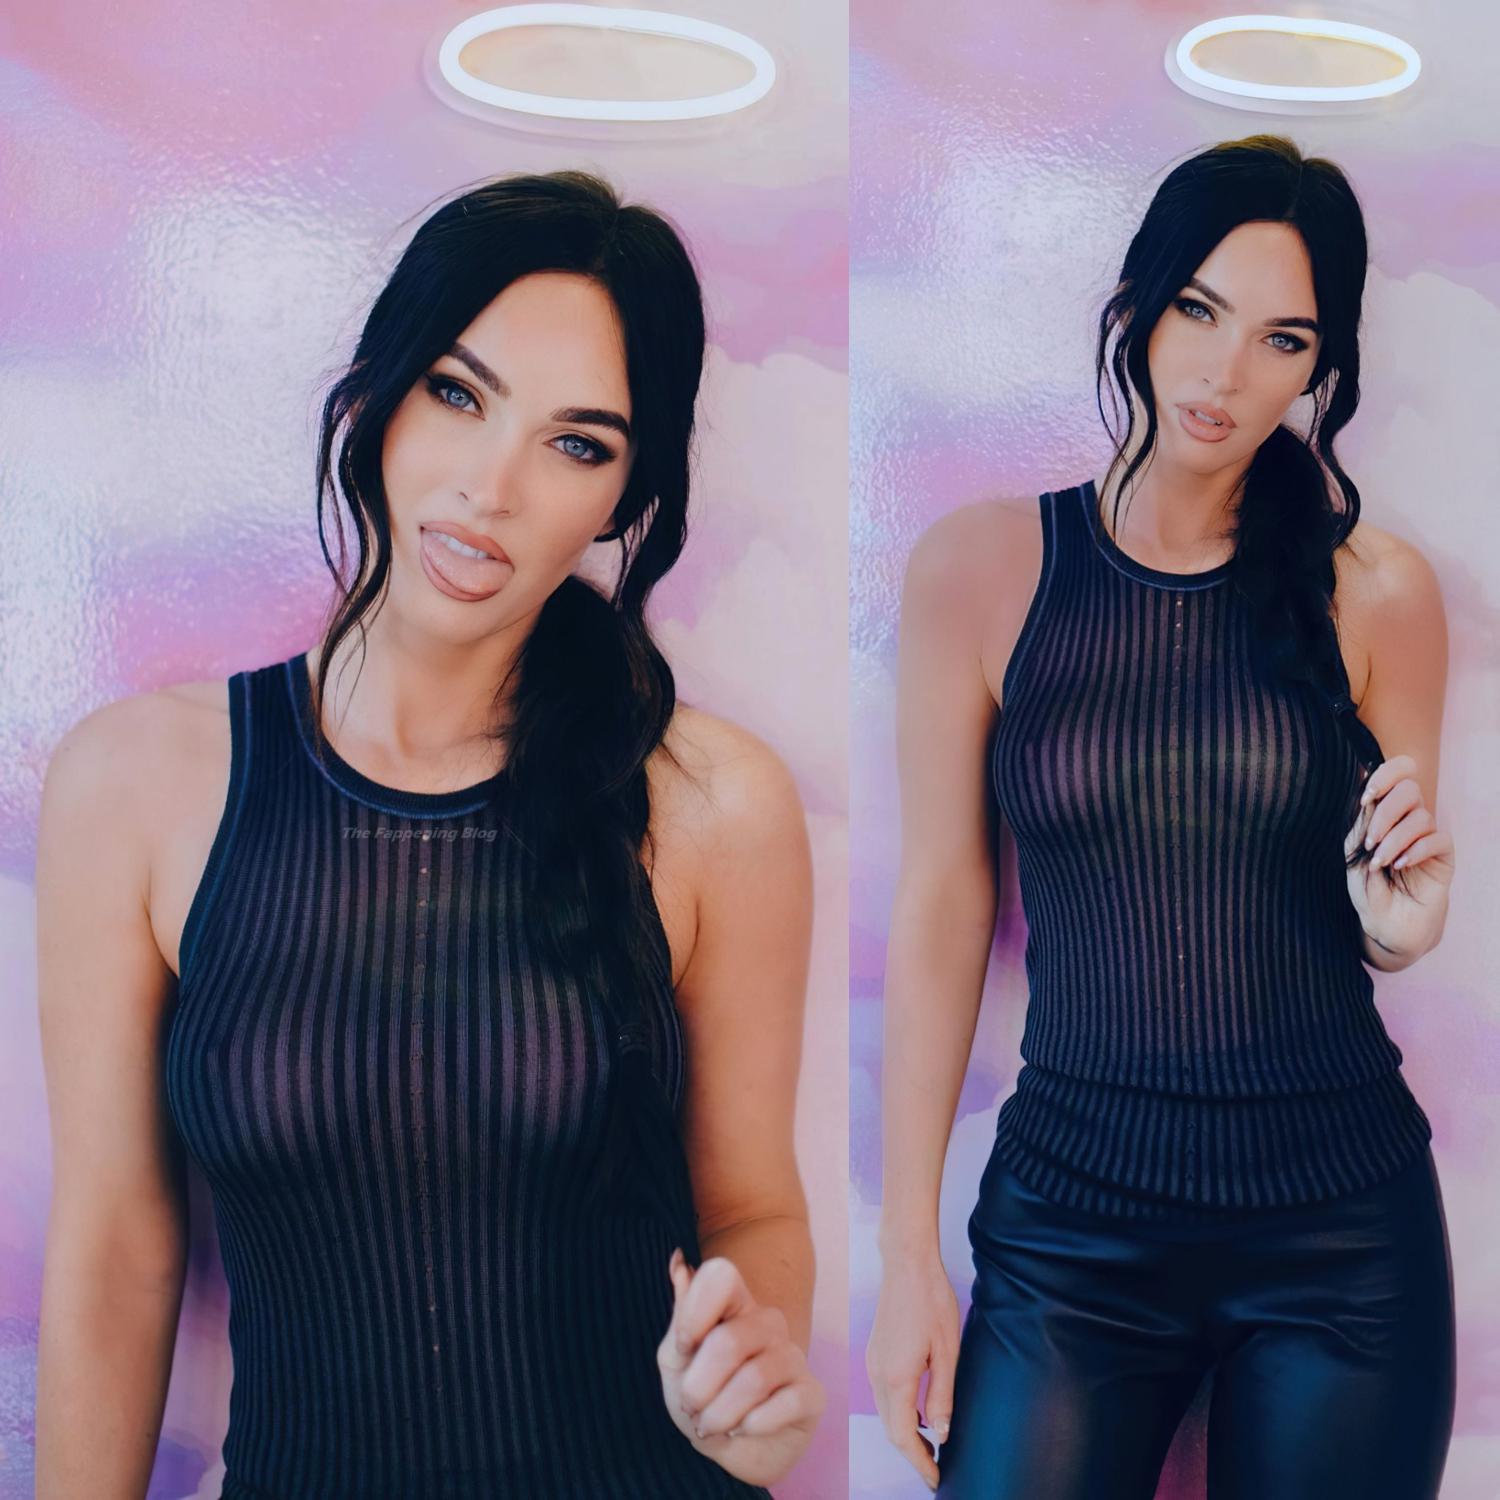 Megan Fox wearing a see through shirt on her Instagram - Nude Celebs